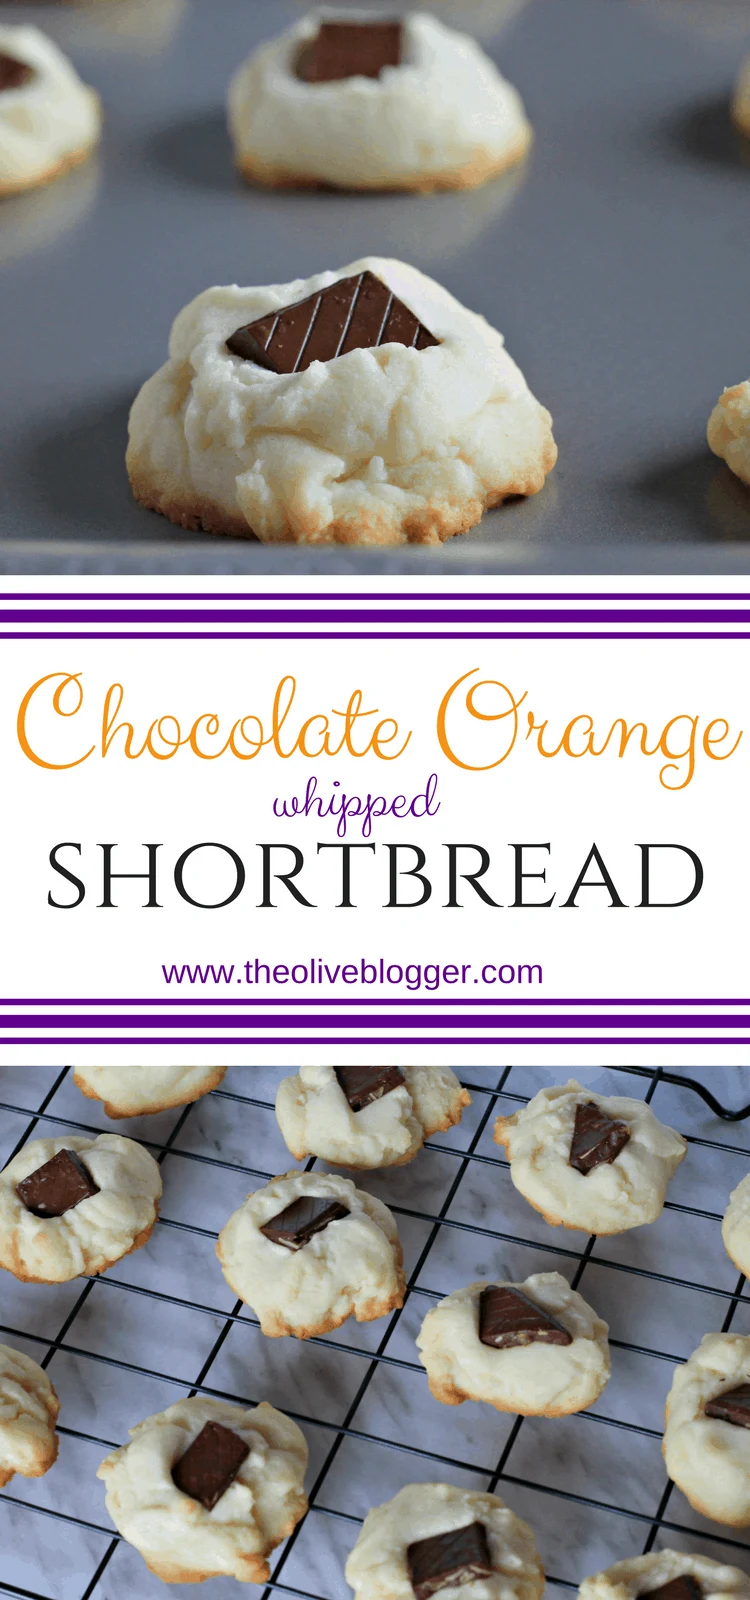 This shortbread cookie melts in your mouth and gives way to a subtle orange flavor that is throughout the cookie, perfect for any cookie swap this Holiday! #ChristmasCookies #ShortbreadCookies #CookieSwap #Shortbread 